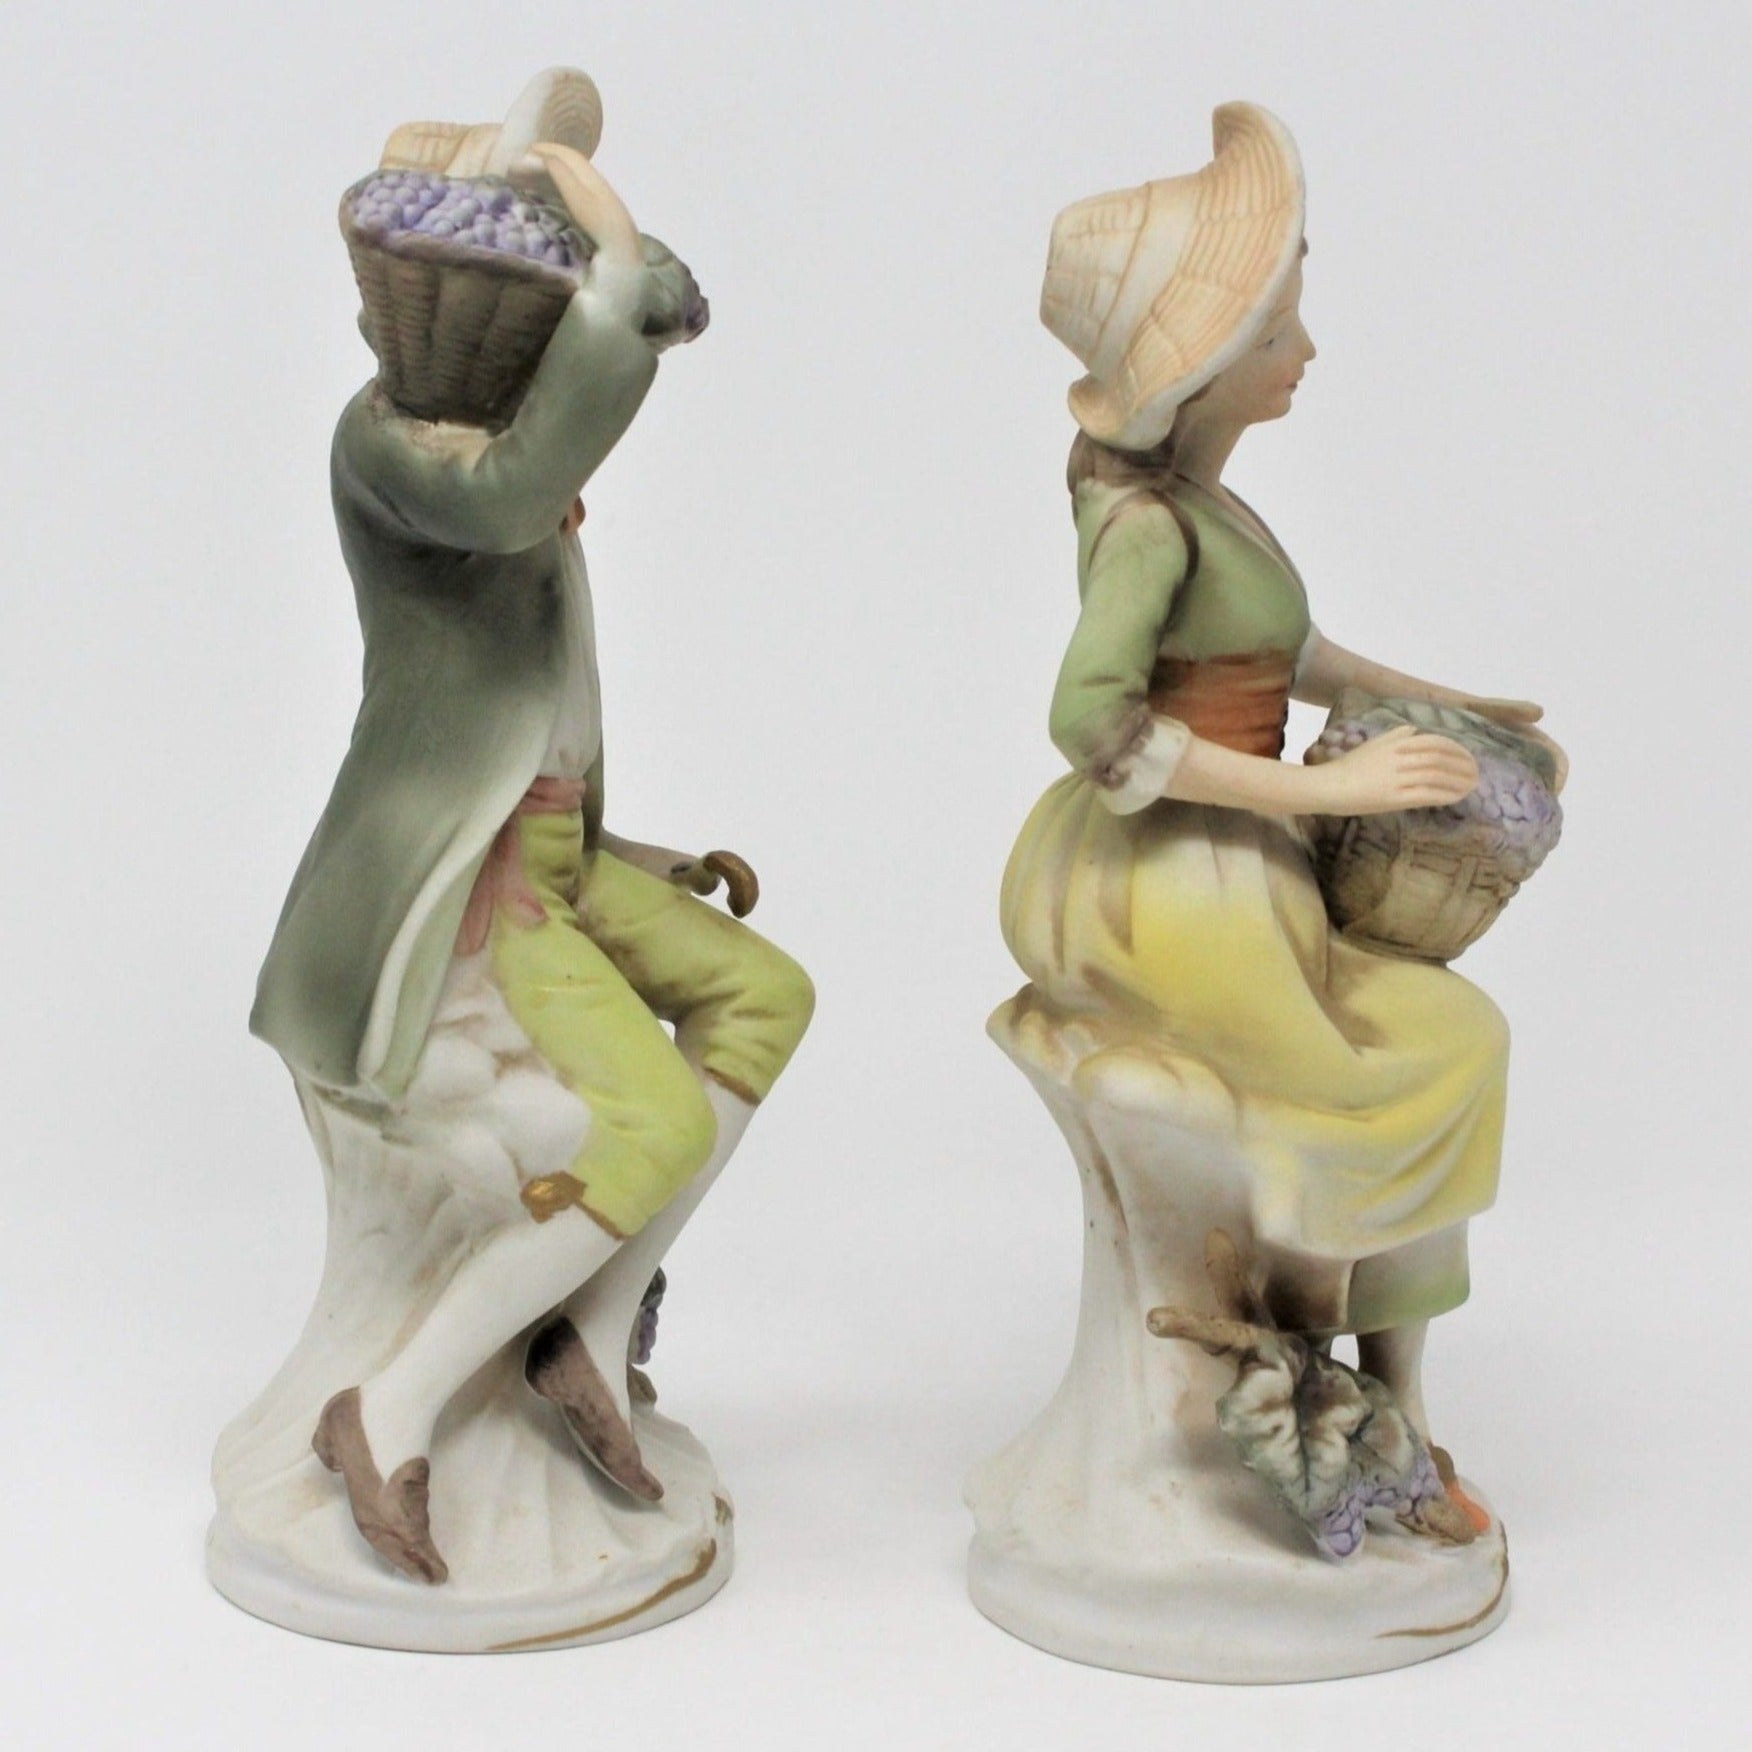 Figurine, HomCo, 1258 Toscany Boy & Girl with Grapes, Porcelain